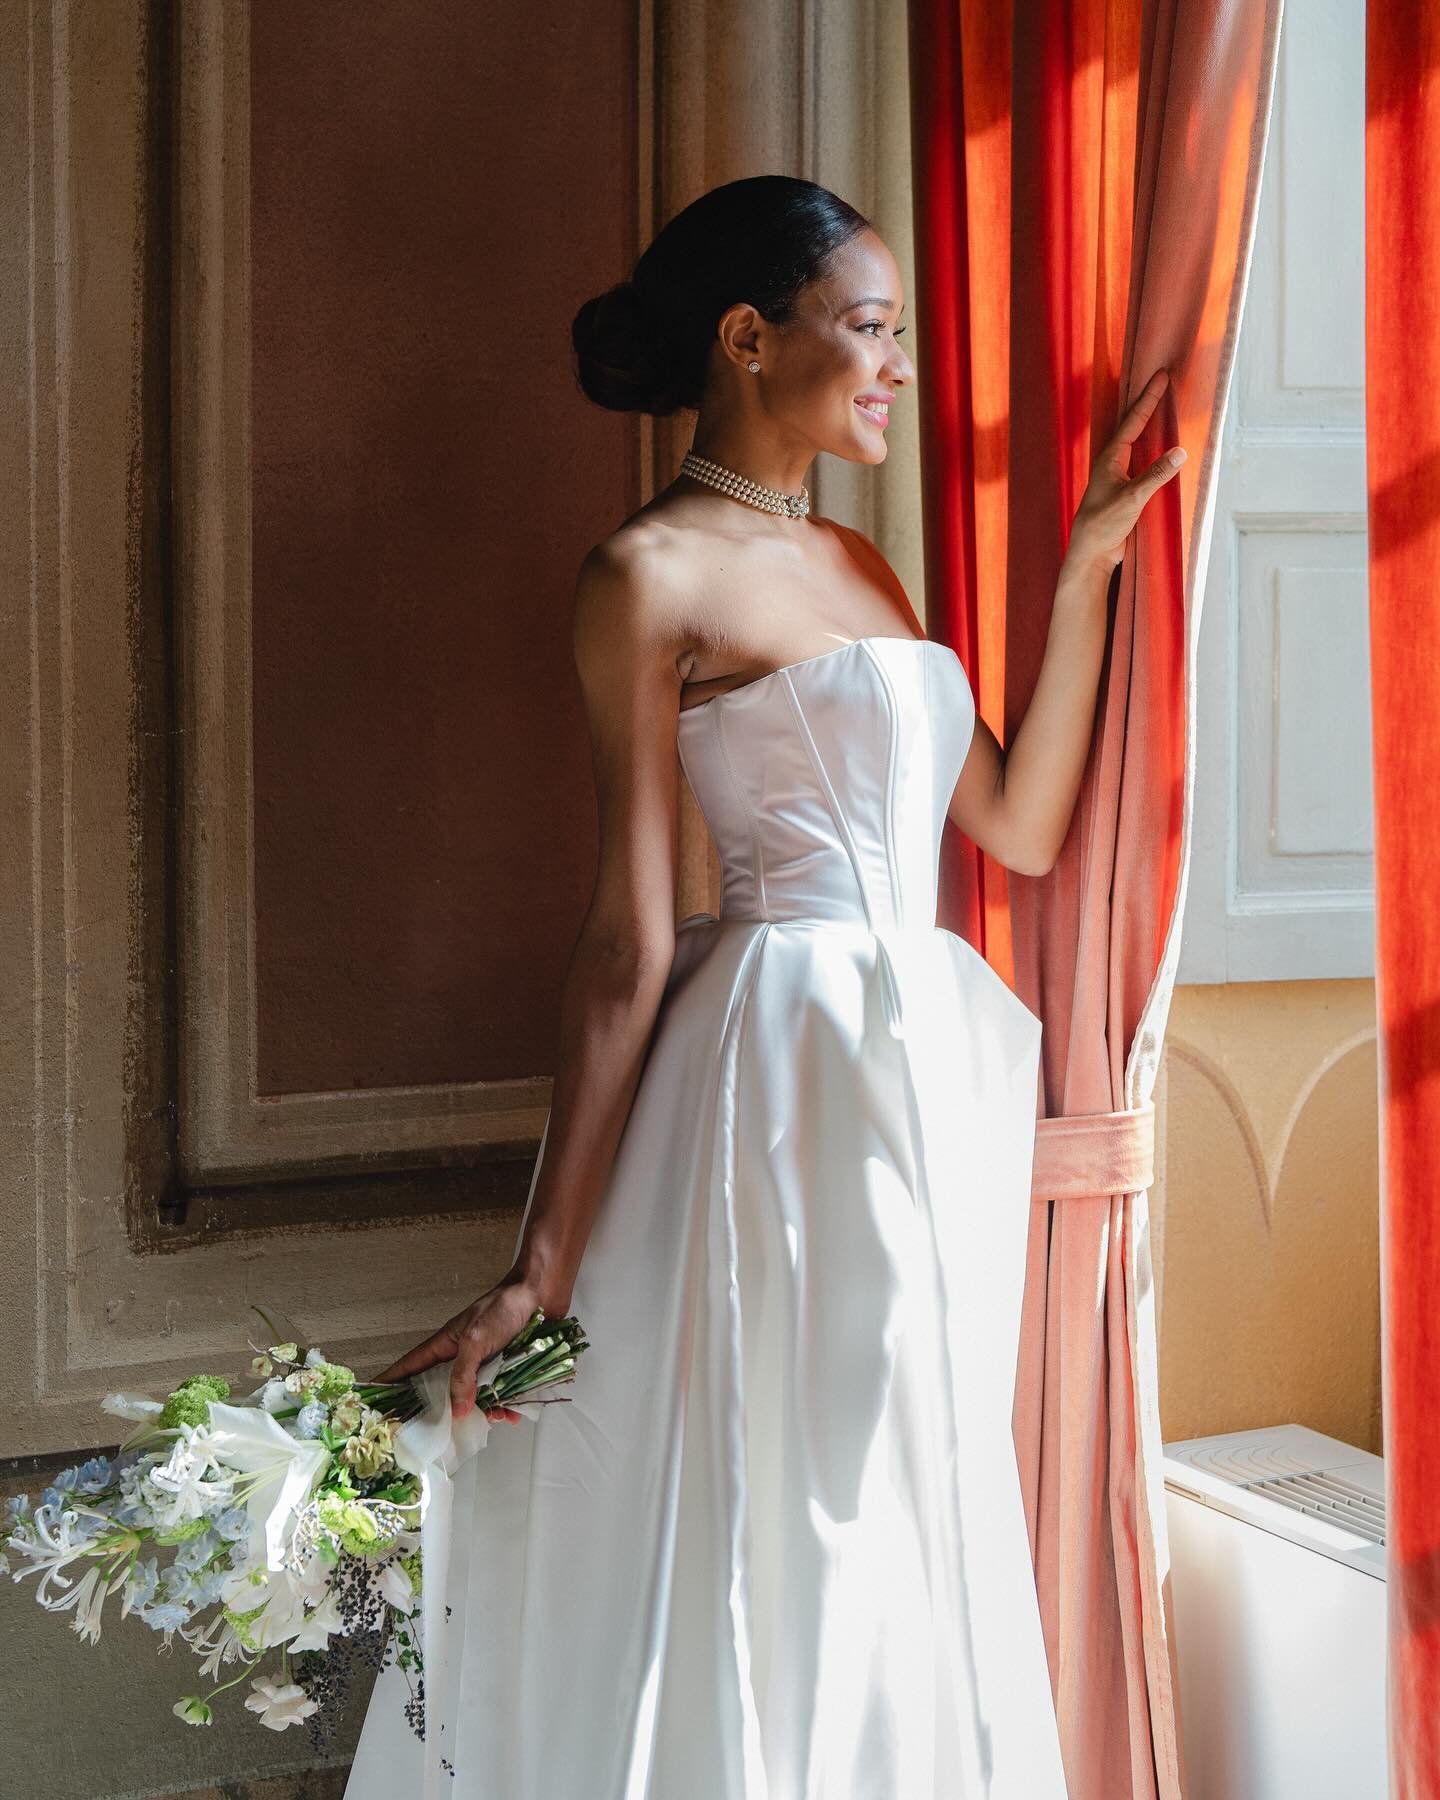 Some timeless bridal portraits for Kayra 🤍 We love how the heavy sutton dress matches the romantic Italian venue.

&mdash;

videography: @liveproduction_official
styling: @anna_torno_style
bridal gowns: @tinavalerdi_official
tuxedos: @carlopignatell